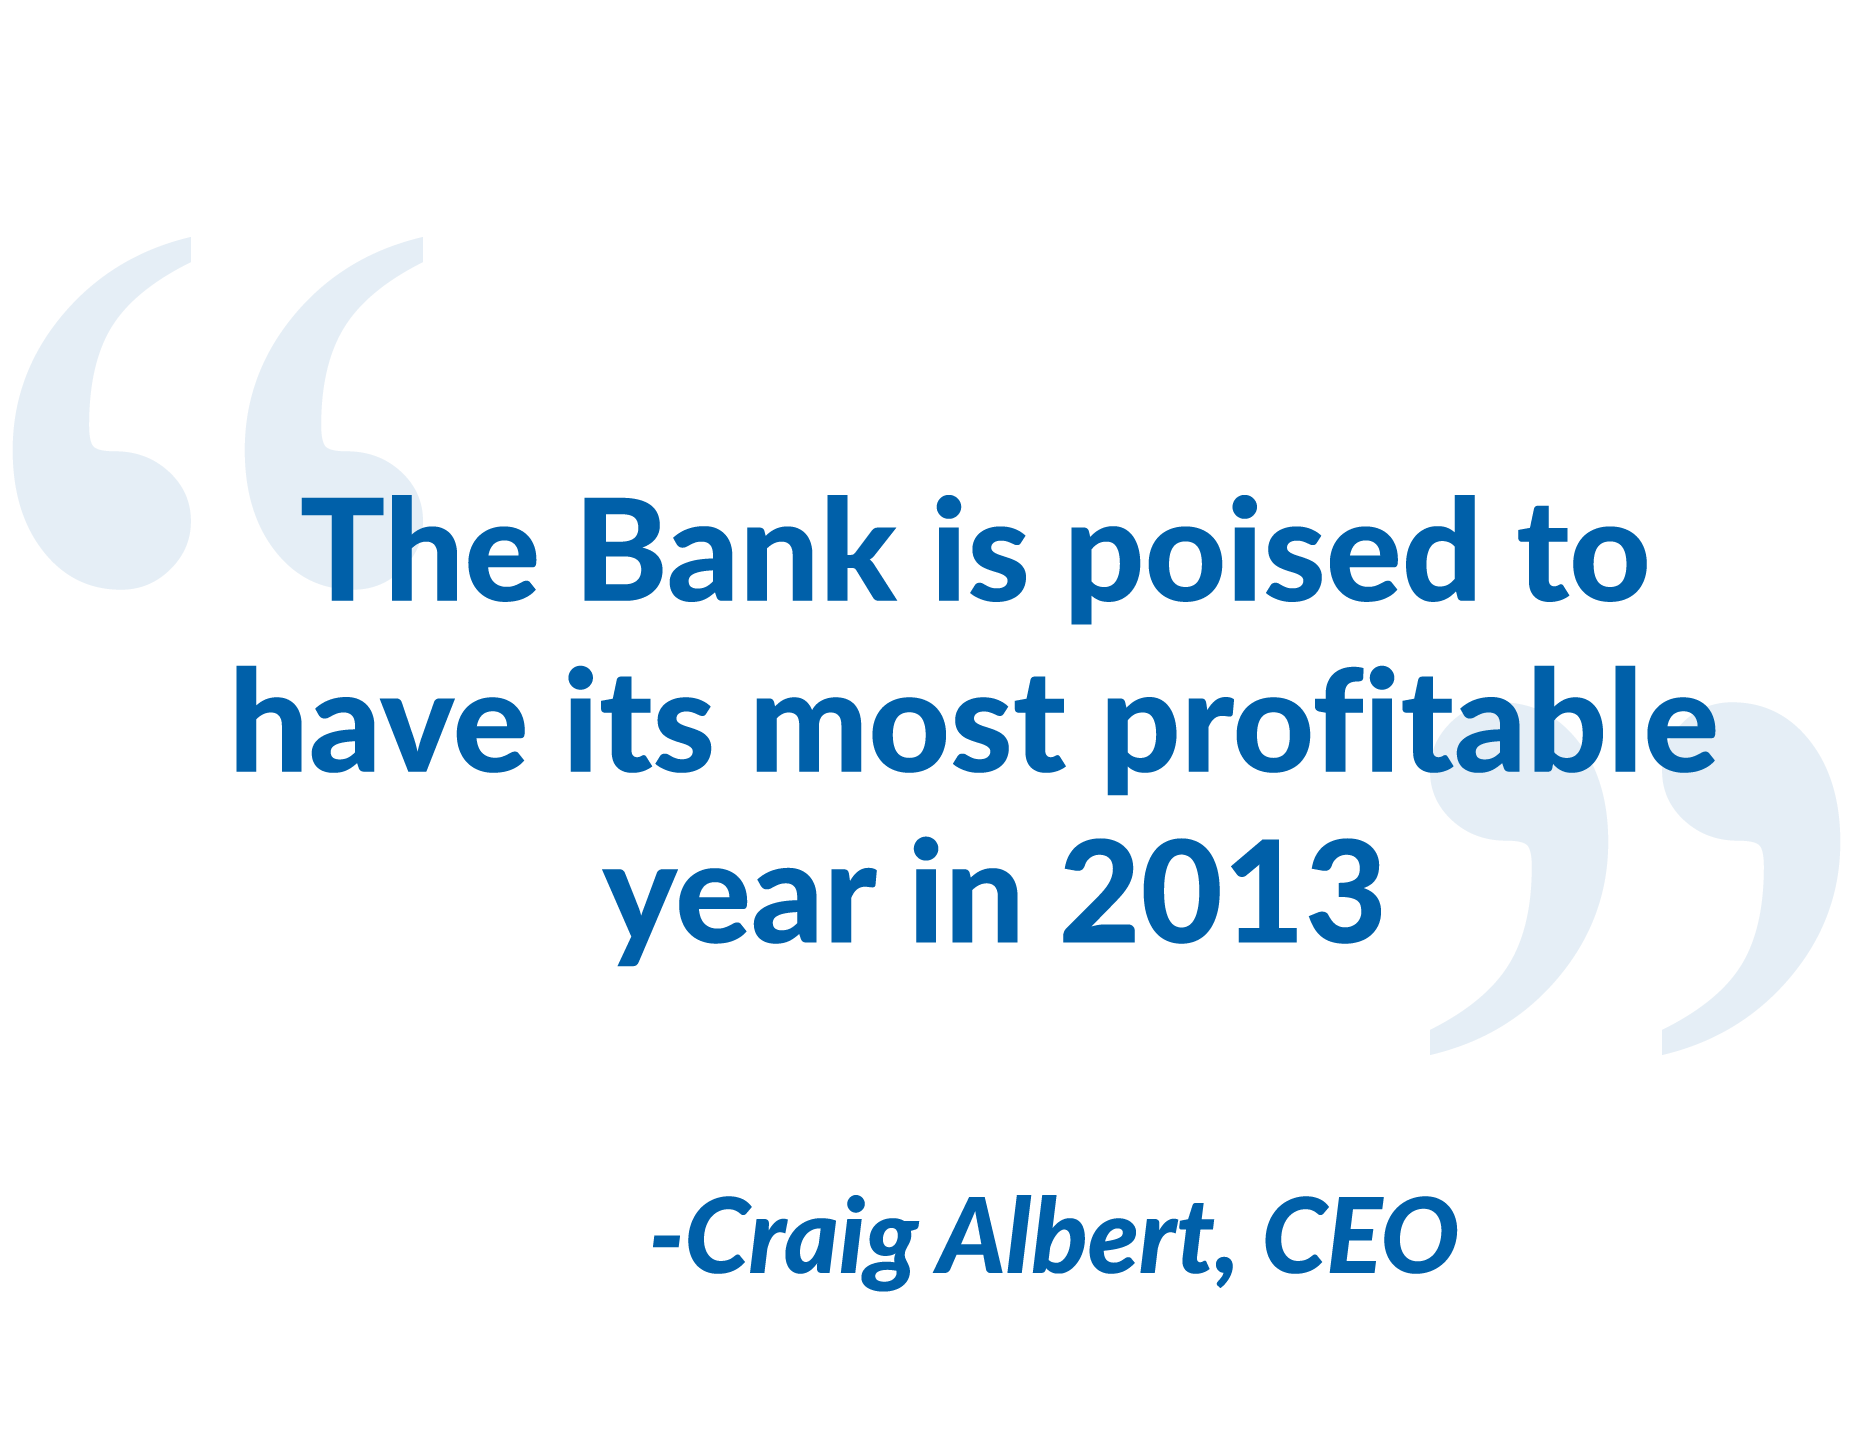 "The bank is posed to have its most profitable year in 2013"